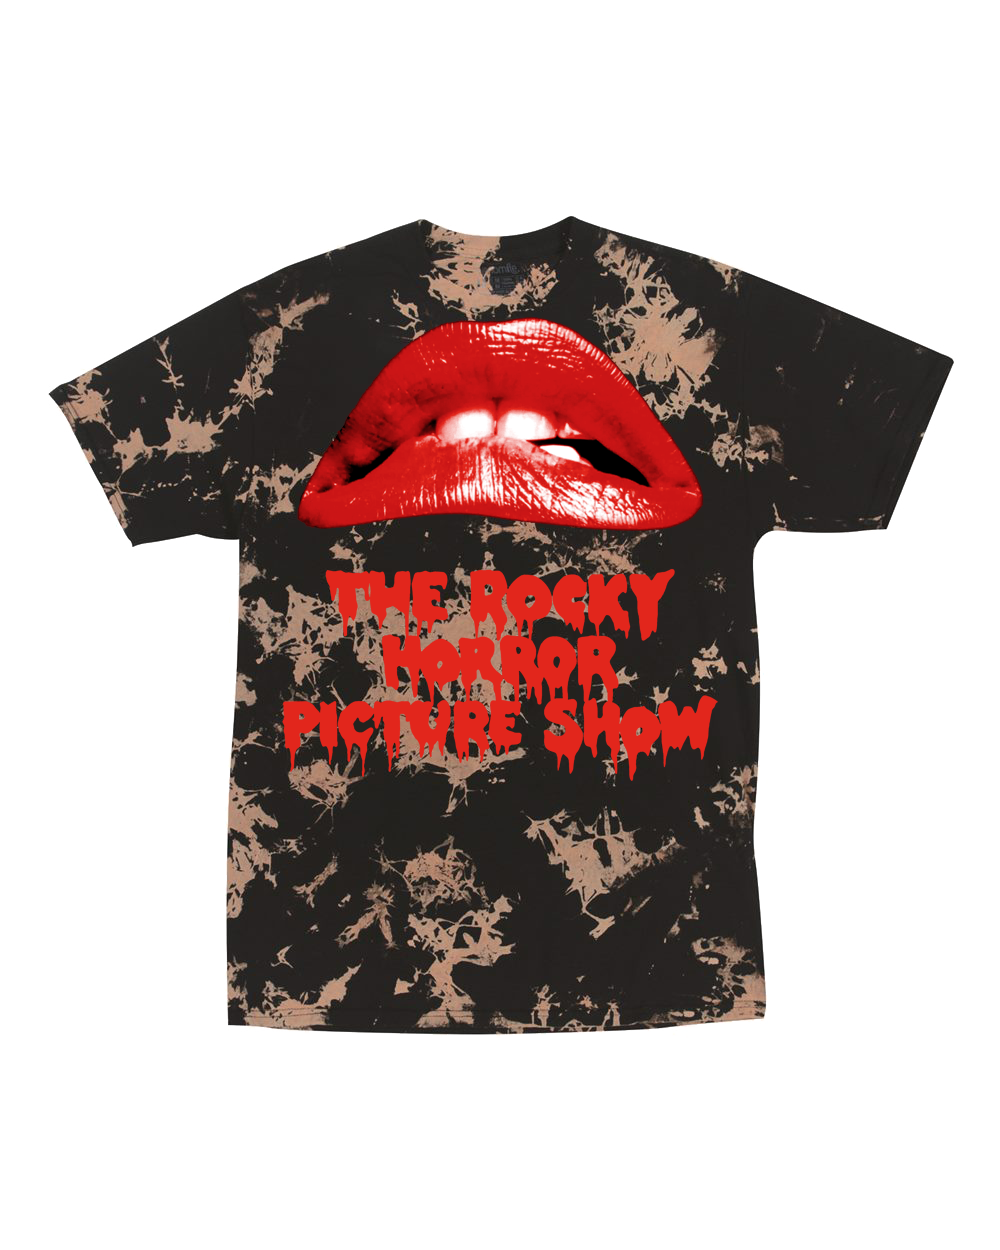 ROCKY HORROR PICTURE SHOW - BLEACHED TEE